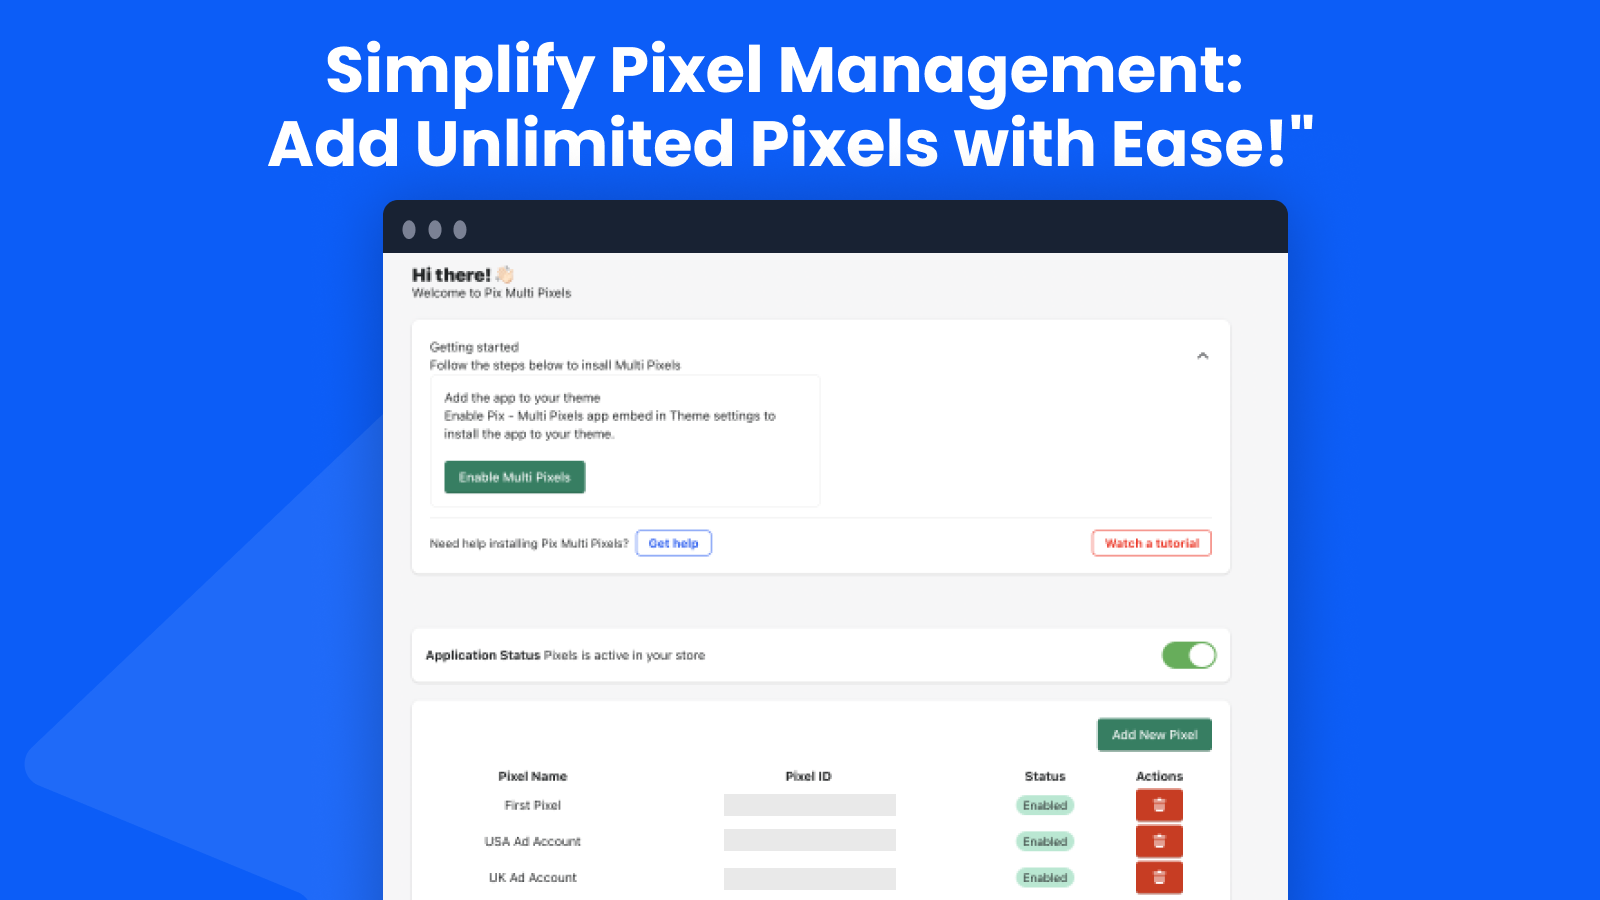 Simplify Pixel Management:  Add Unlimited Pixels with Ease!"